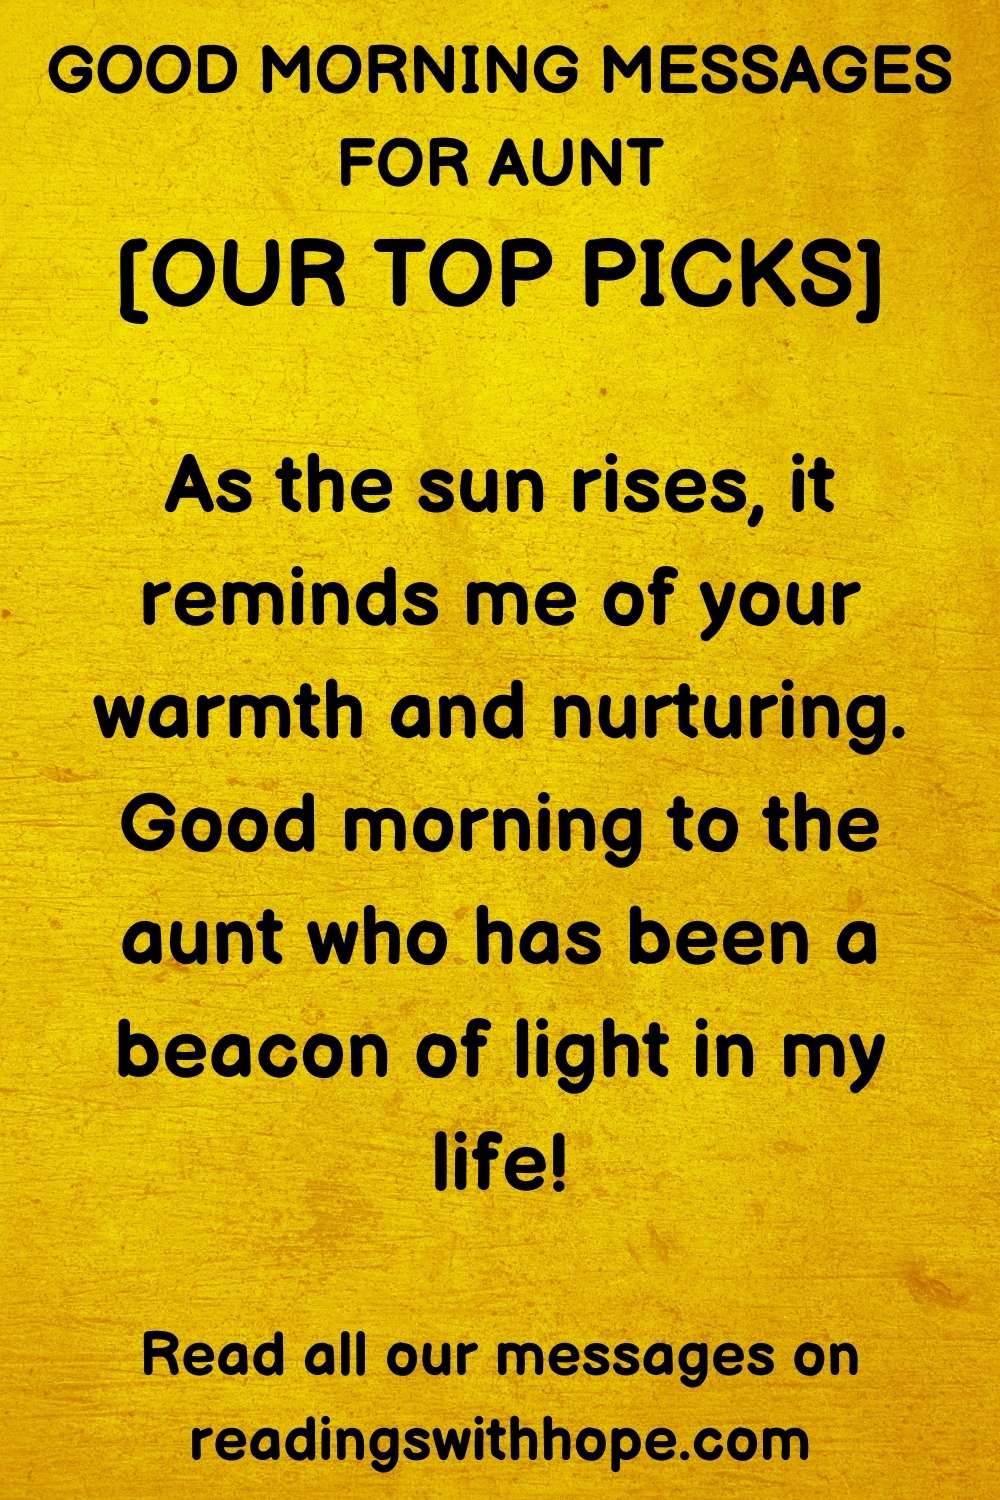 good morning message for aunt that says As the sun rises, it reminds me of your warmth and nurturing. Good morning to the aunt who has been a beacon of light in my life!